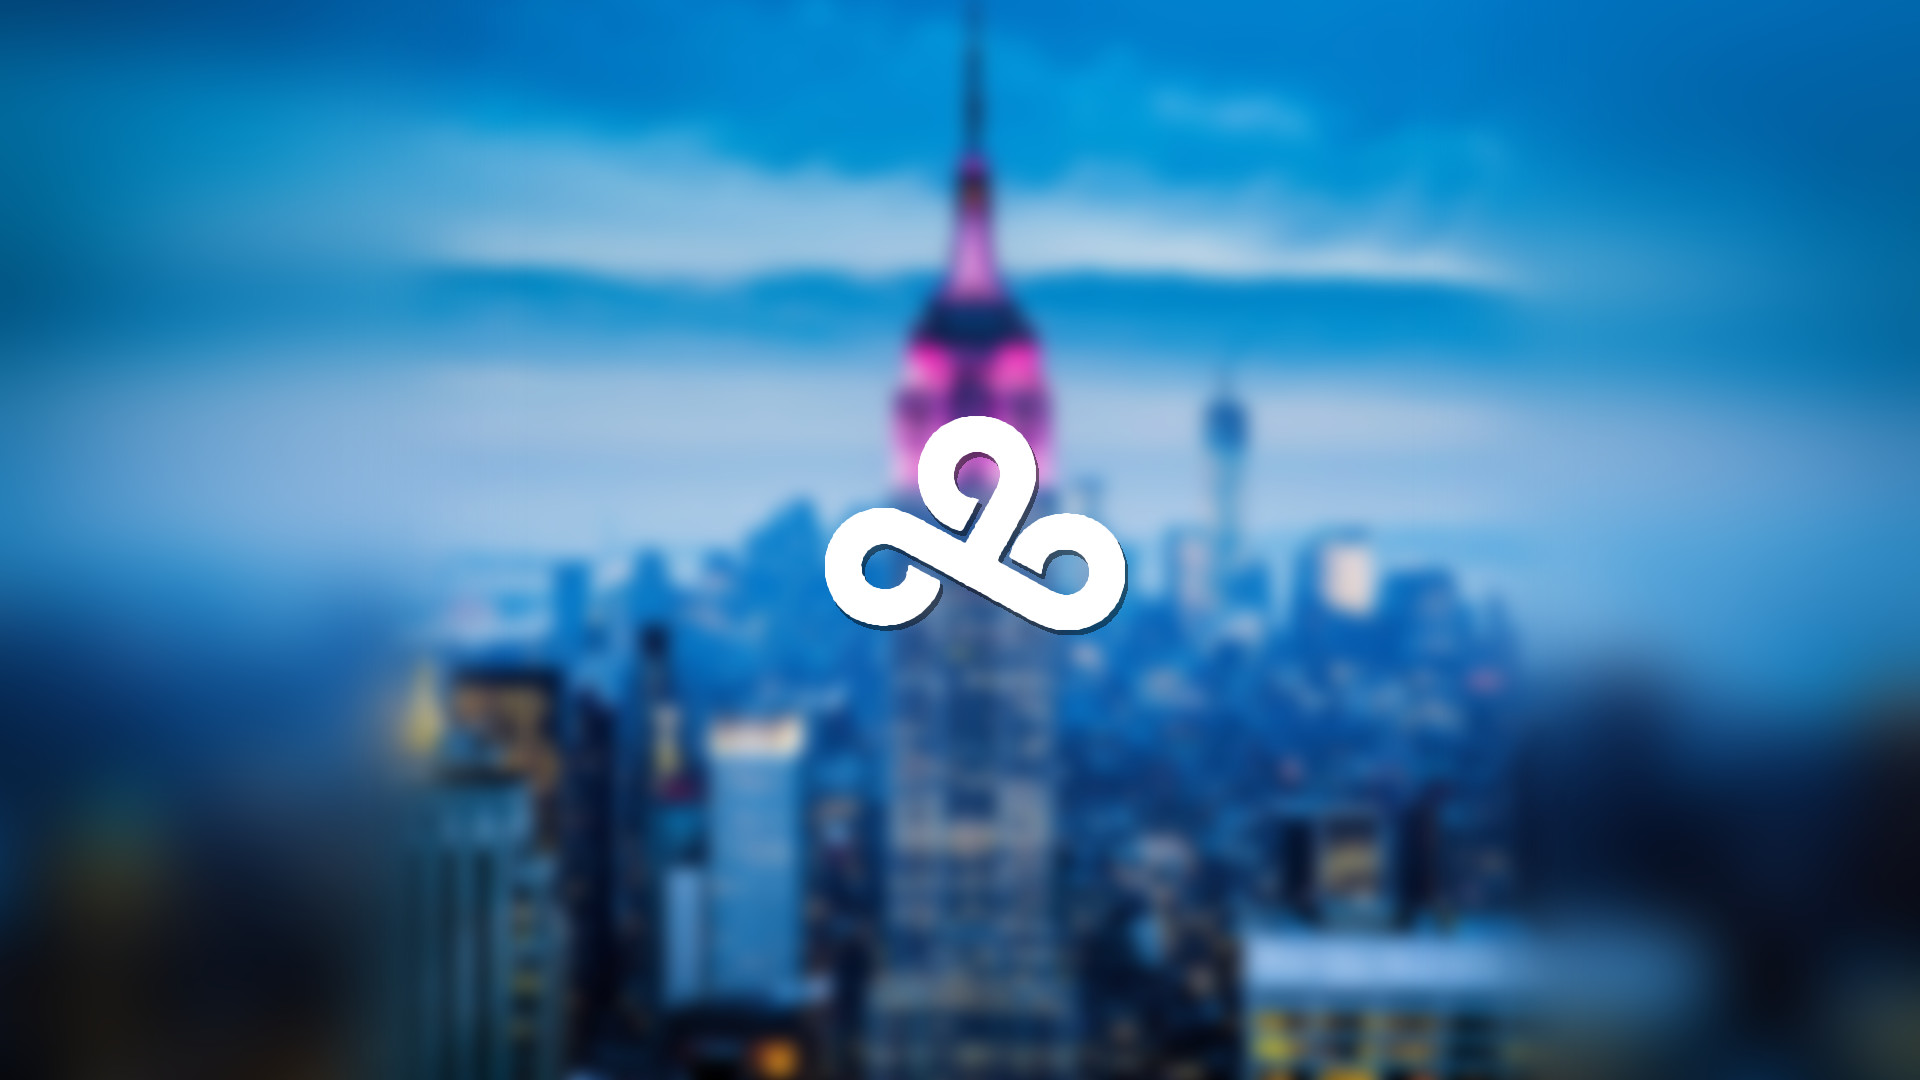 Cloud9 HD Wallpapers and Backgrounds